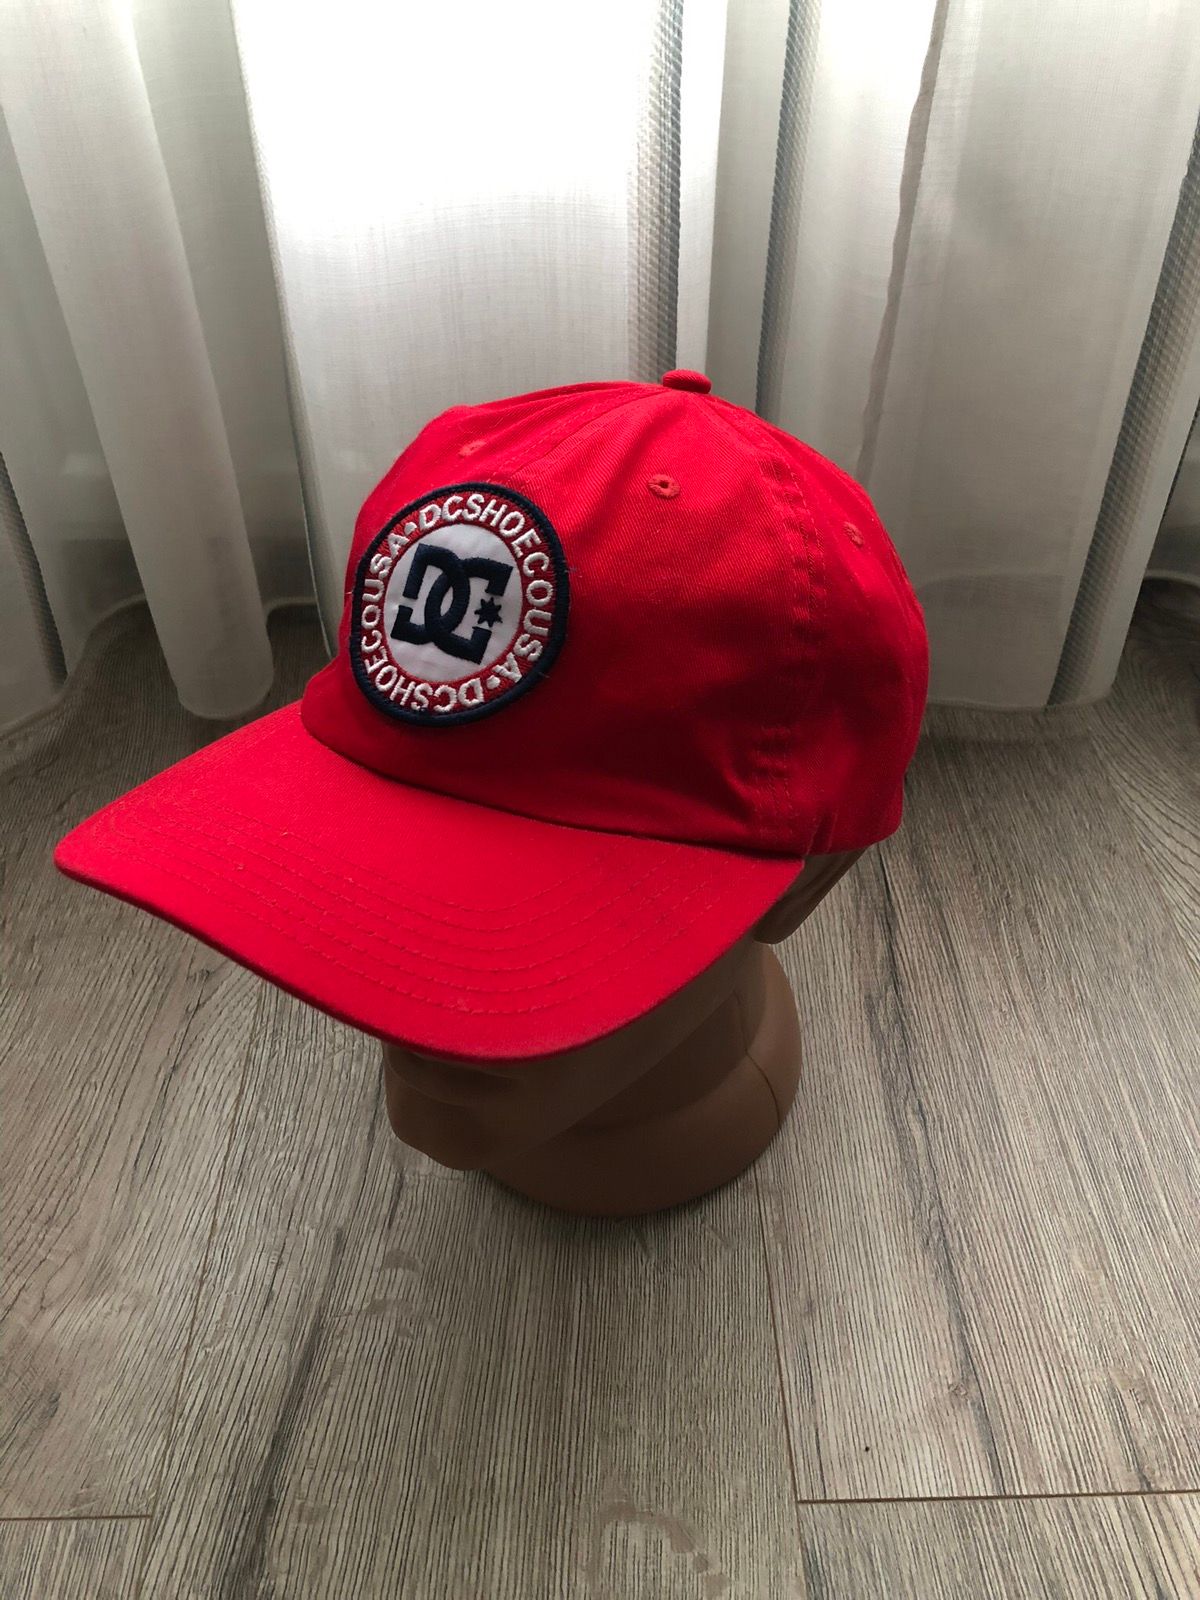 Streetwear DC Shoe Hook-Ups Red Cap Vintage Size ONE SIZE - 1 Preview